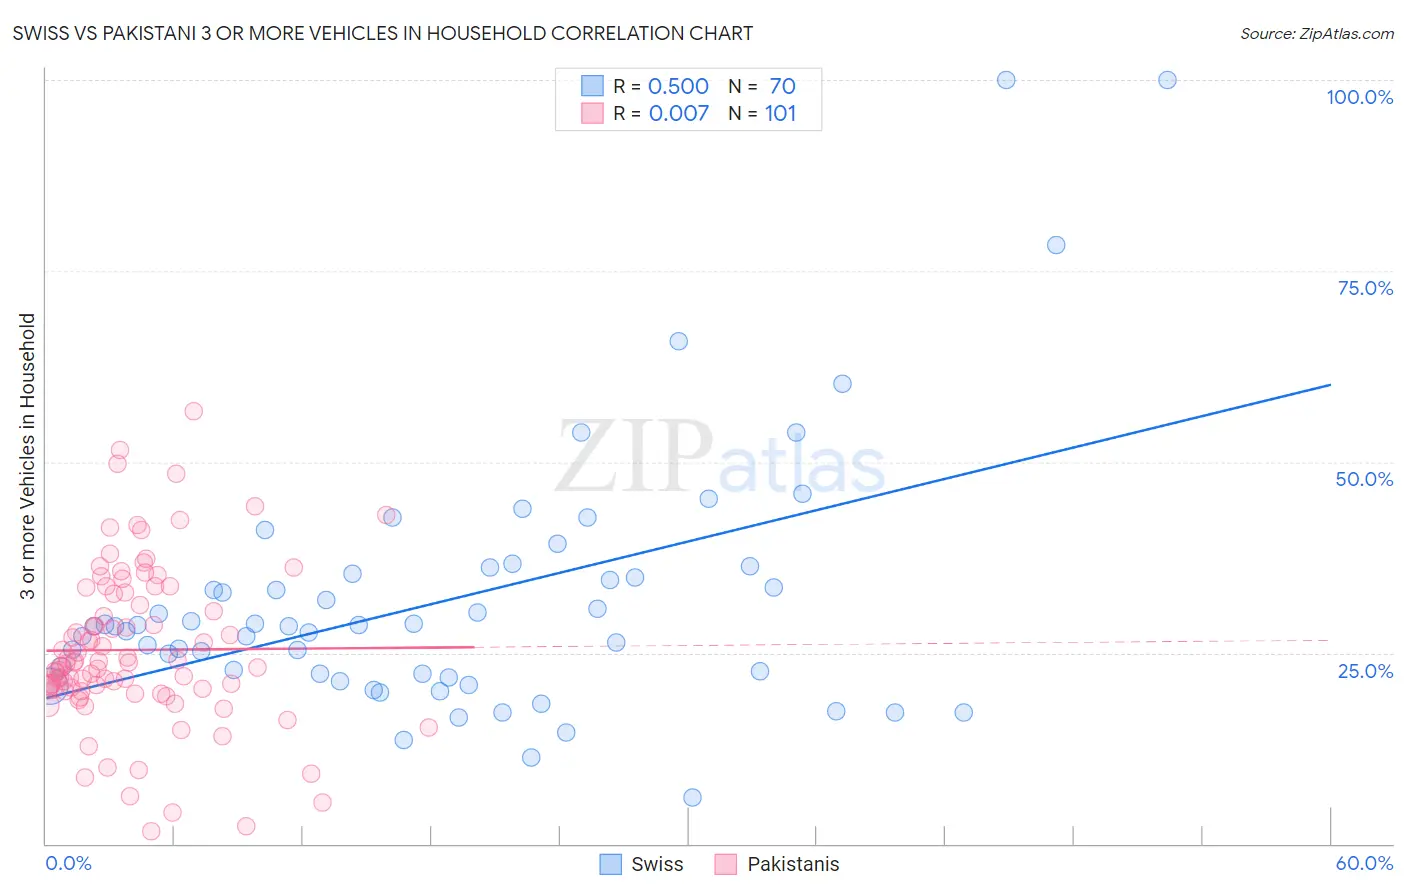 Swiss vs Pakistani 3 or more Vehicles in Household